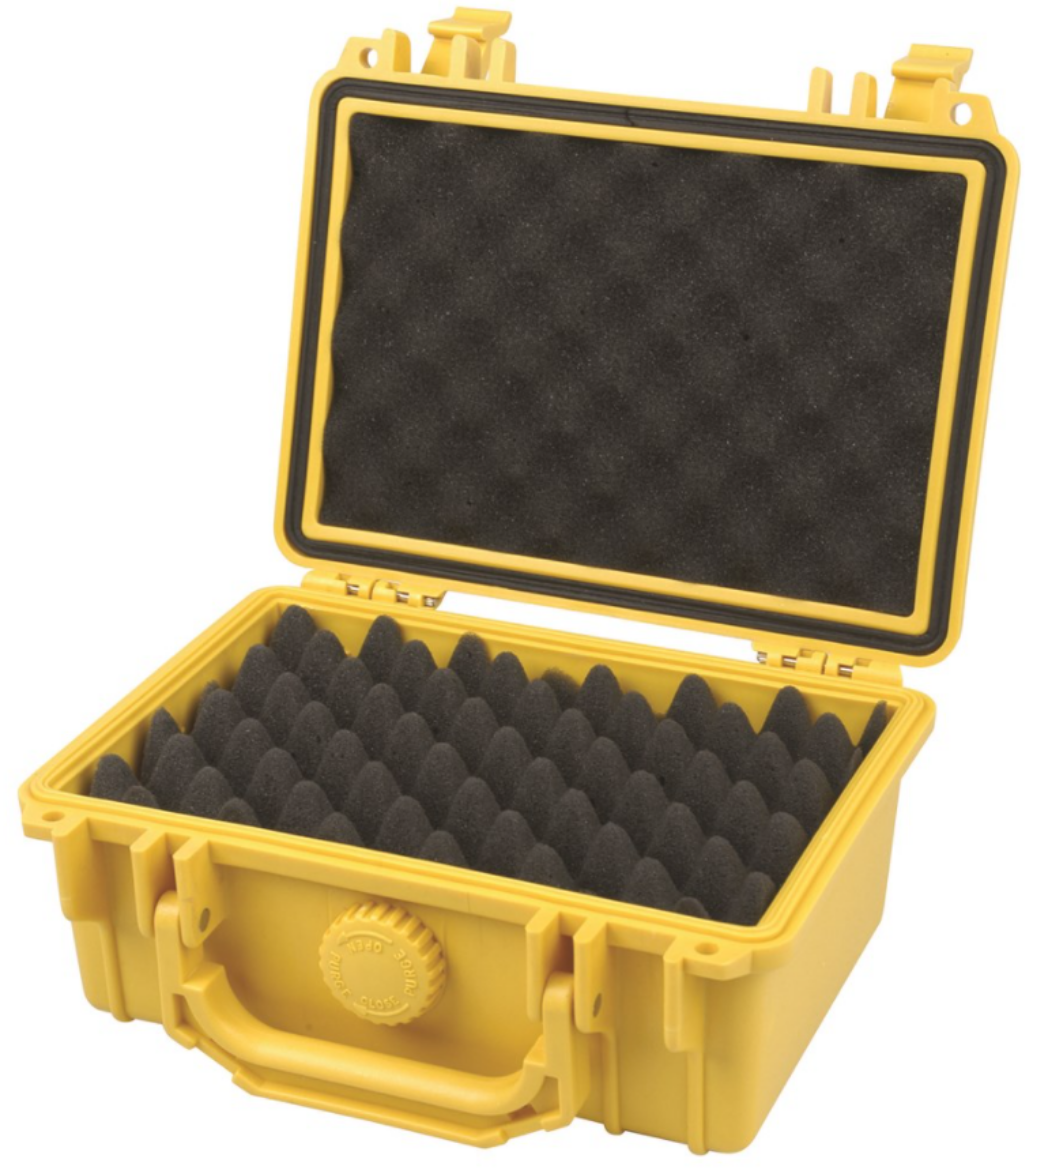 Picture of KINCROME SAFE CASE Small 210mm